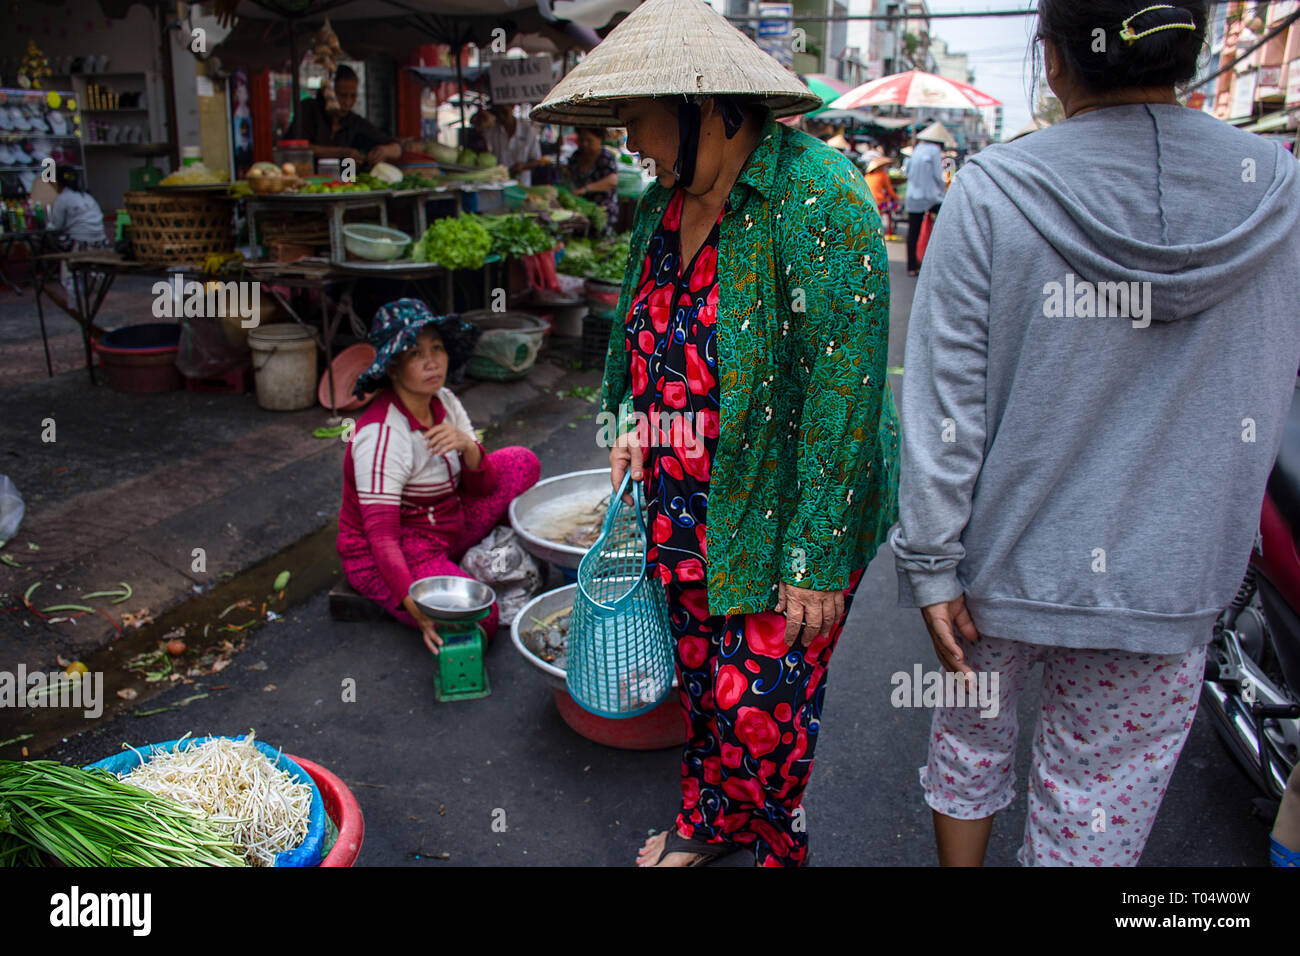 Elderly Asian woman in bright outfit with Chinese hat shopping for vegetables at a street market, Ho Chi Minh City, Vietnam. Stock Photo